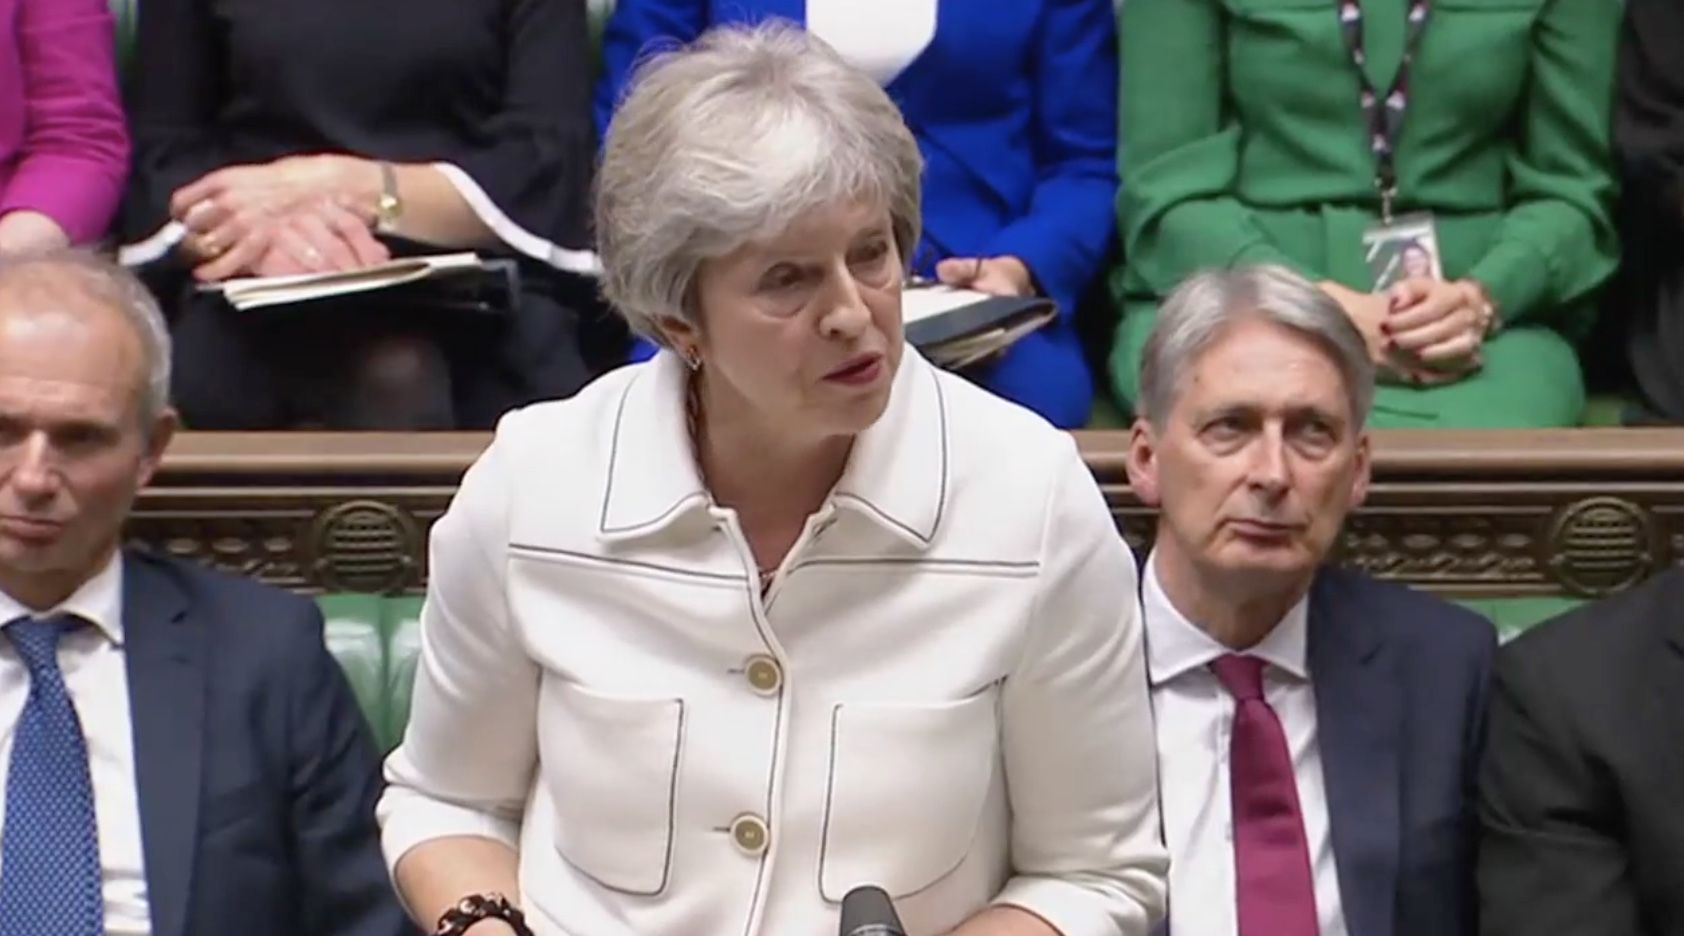 May addressing parliament